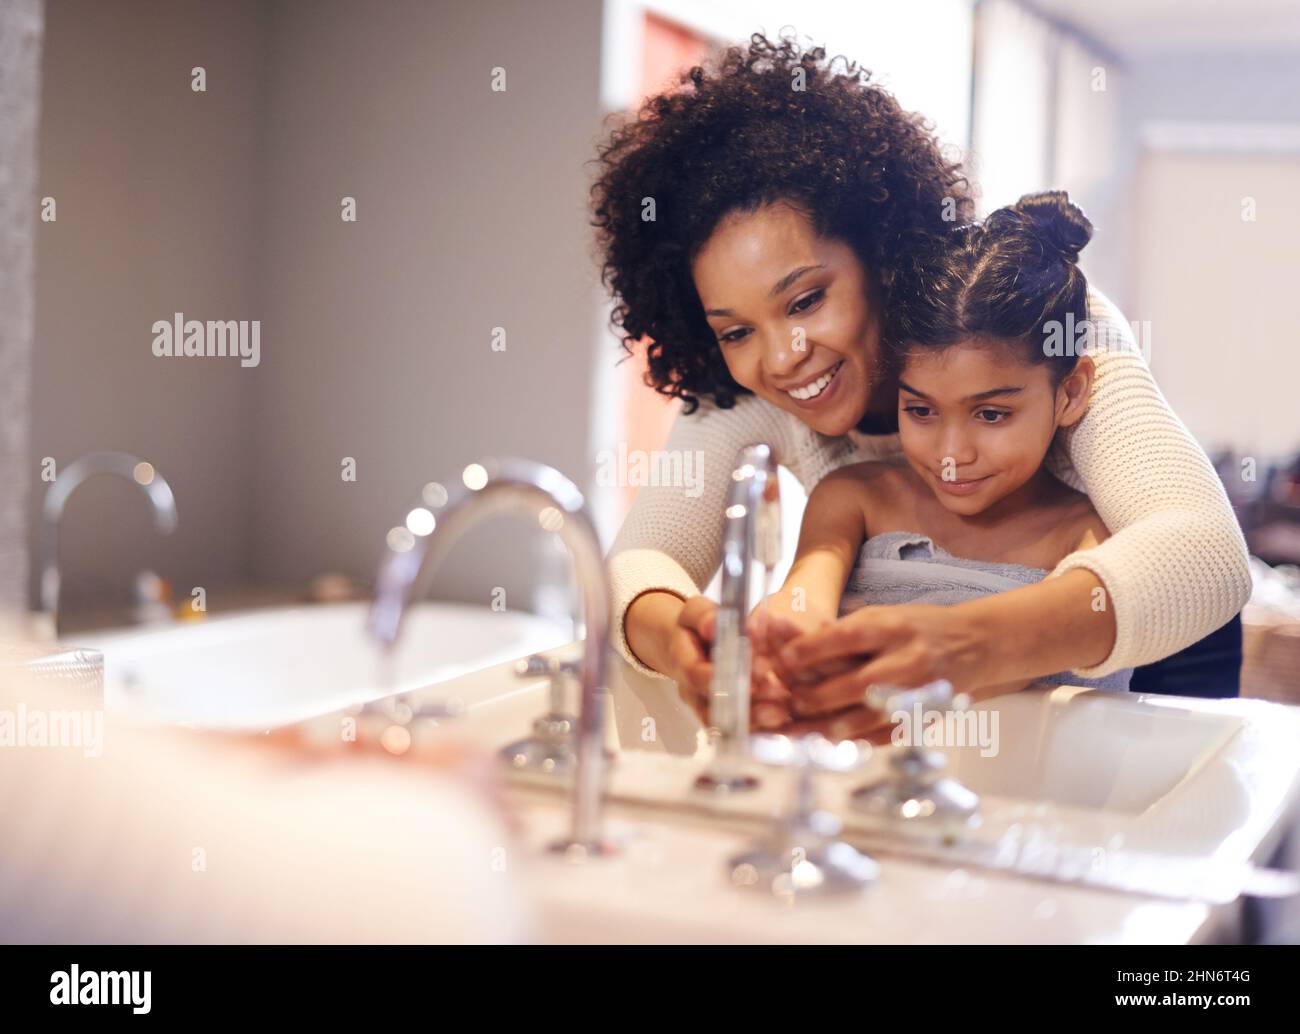 Lets get them good and clean. Cropped shot of a mother and daughter washing their hands at the bathroom sink. Stock Photo